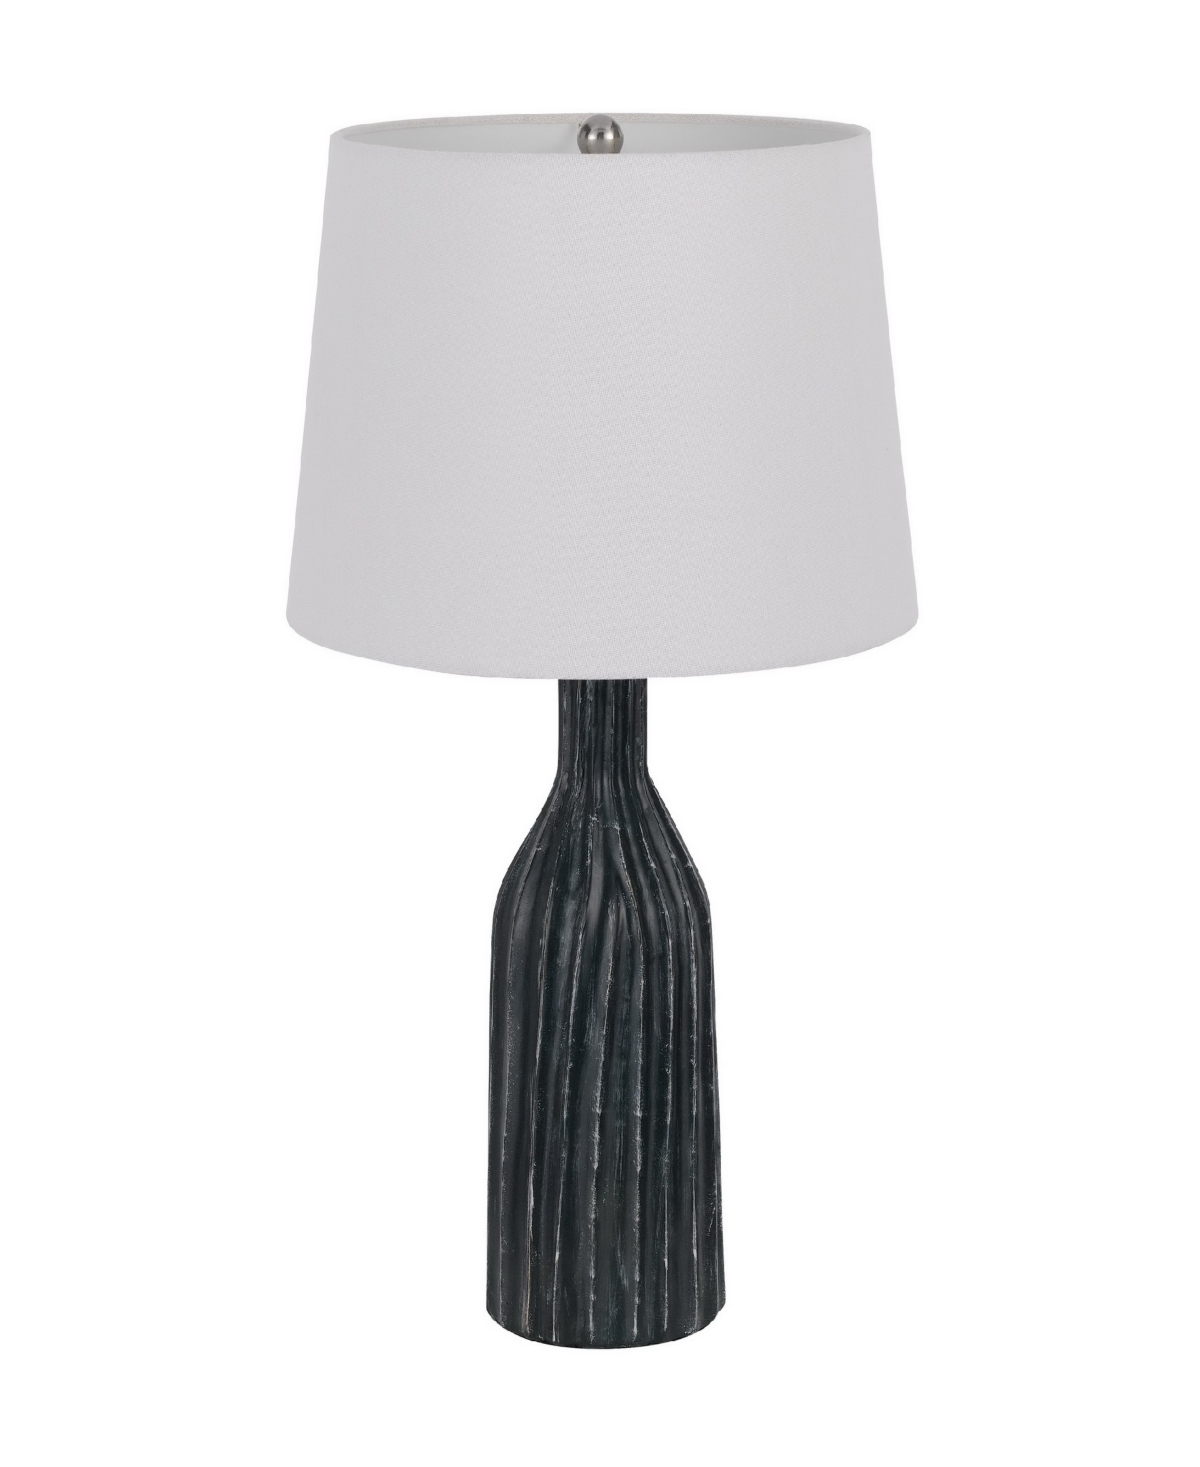 Shop Cal Lighting 24.5" Height Ceramic Table Lamp Set In Marble